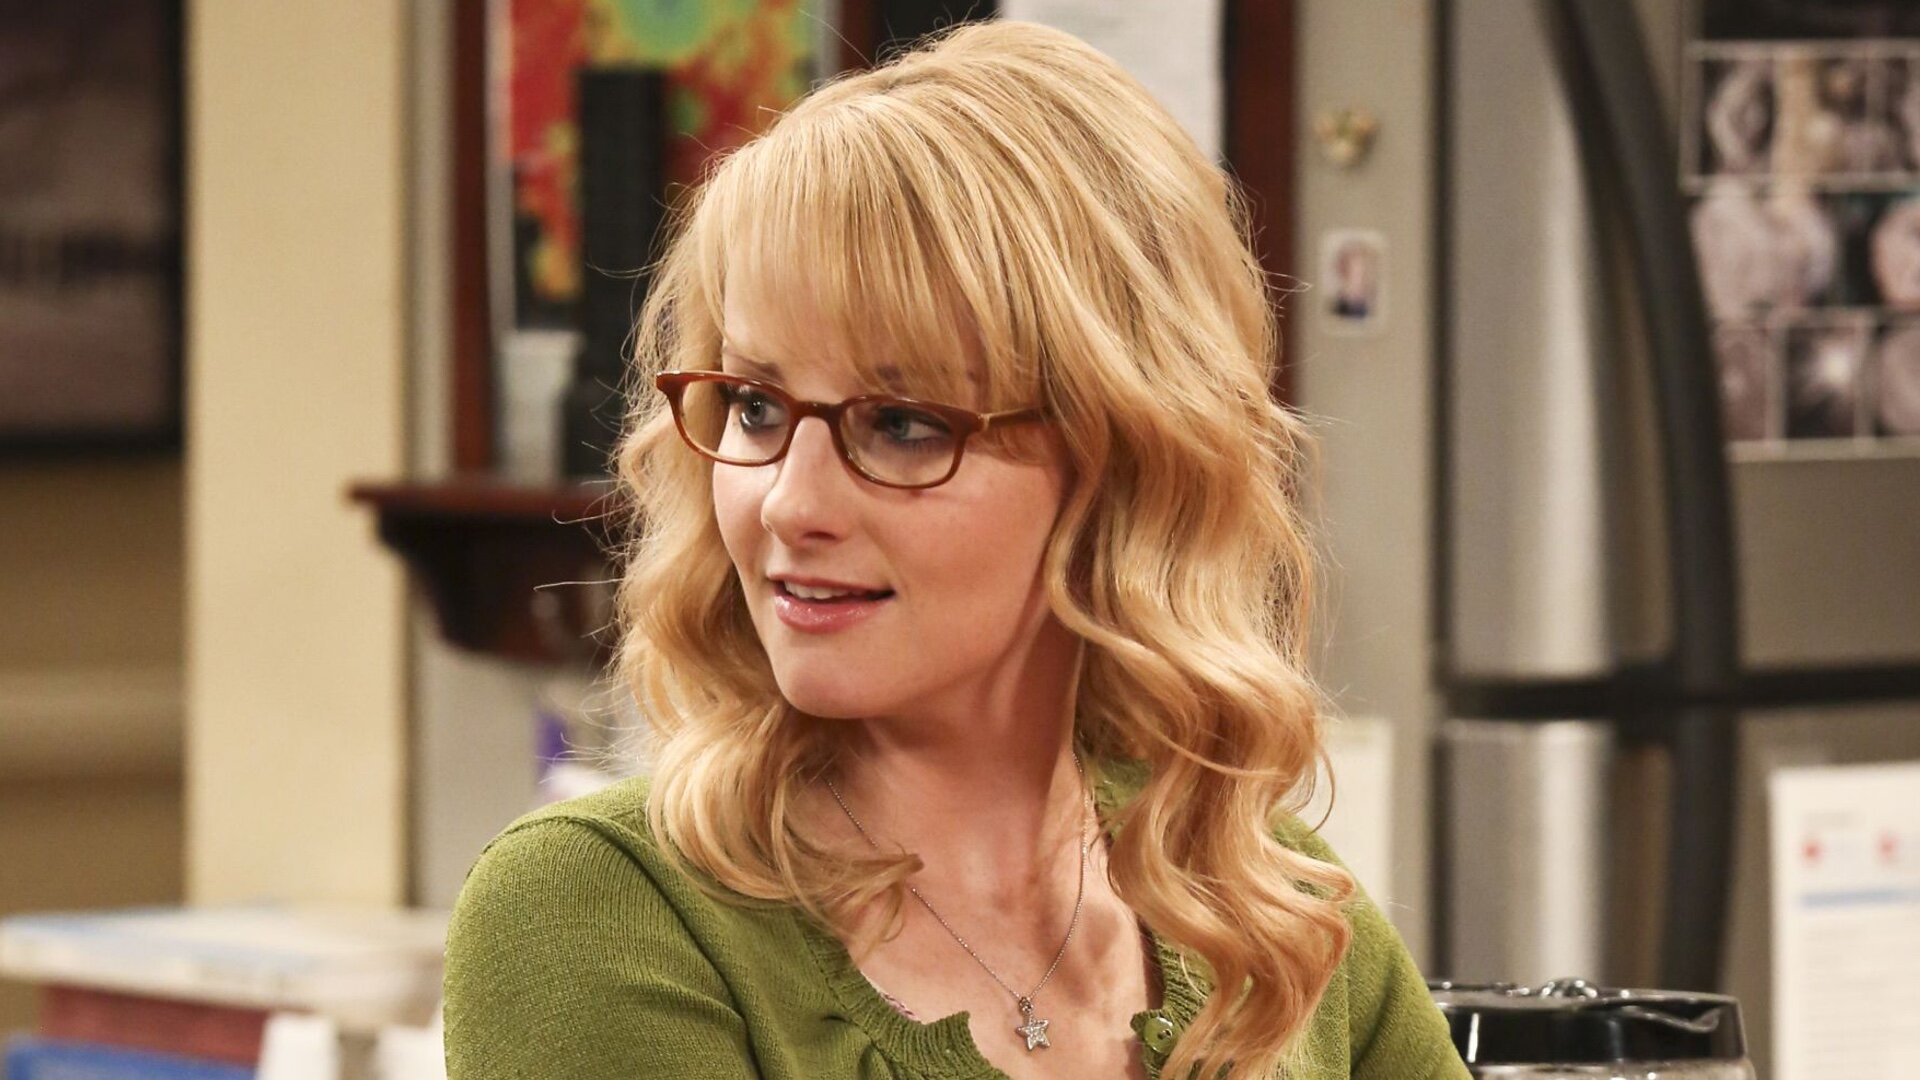 the big bang theory actress melissa rauch to star in night court follow up alongside original series star john larroquette